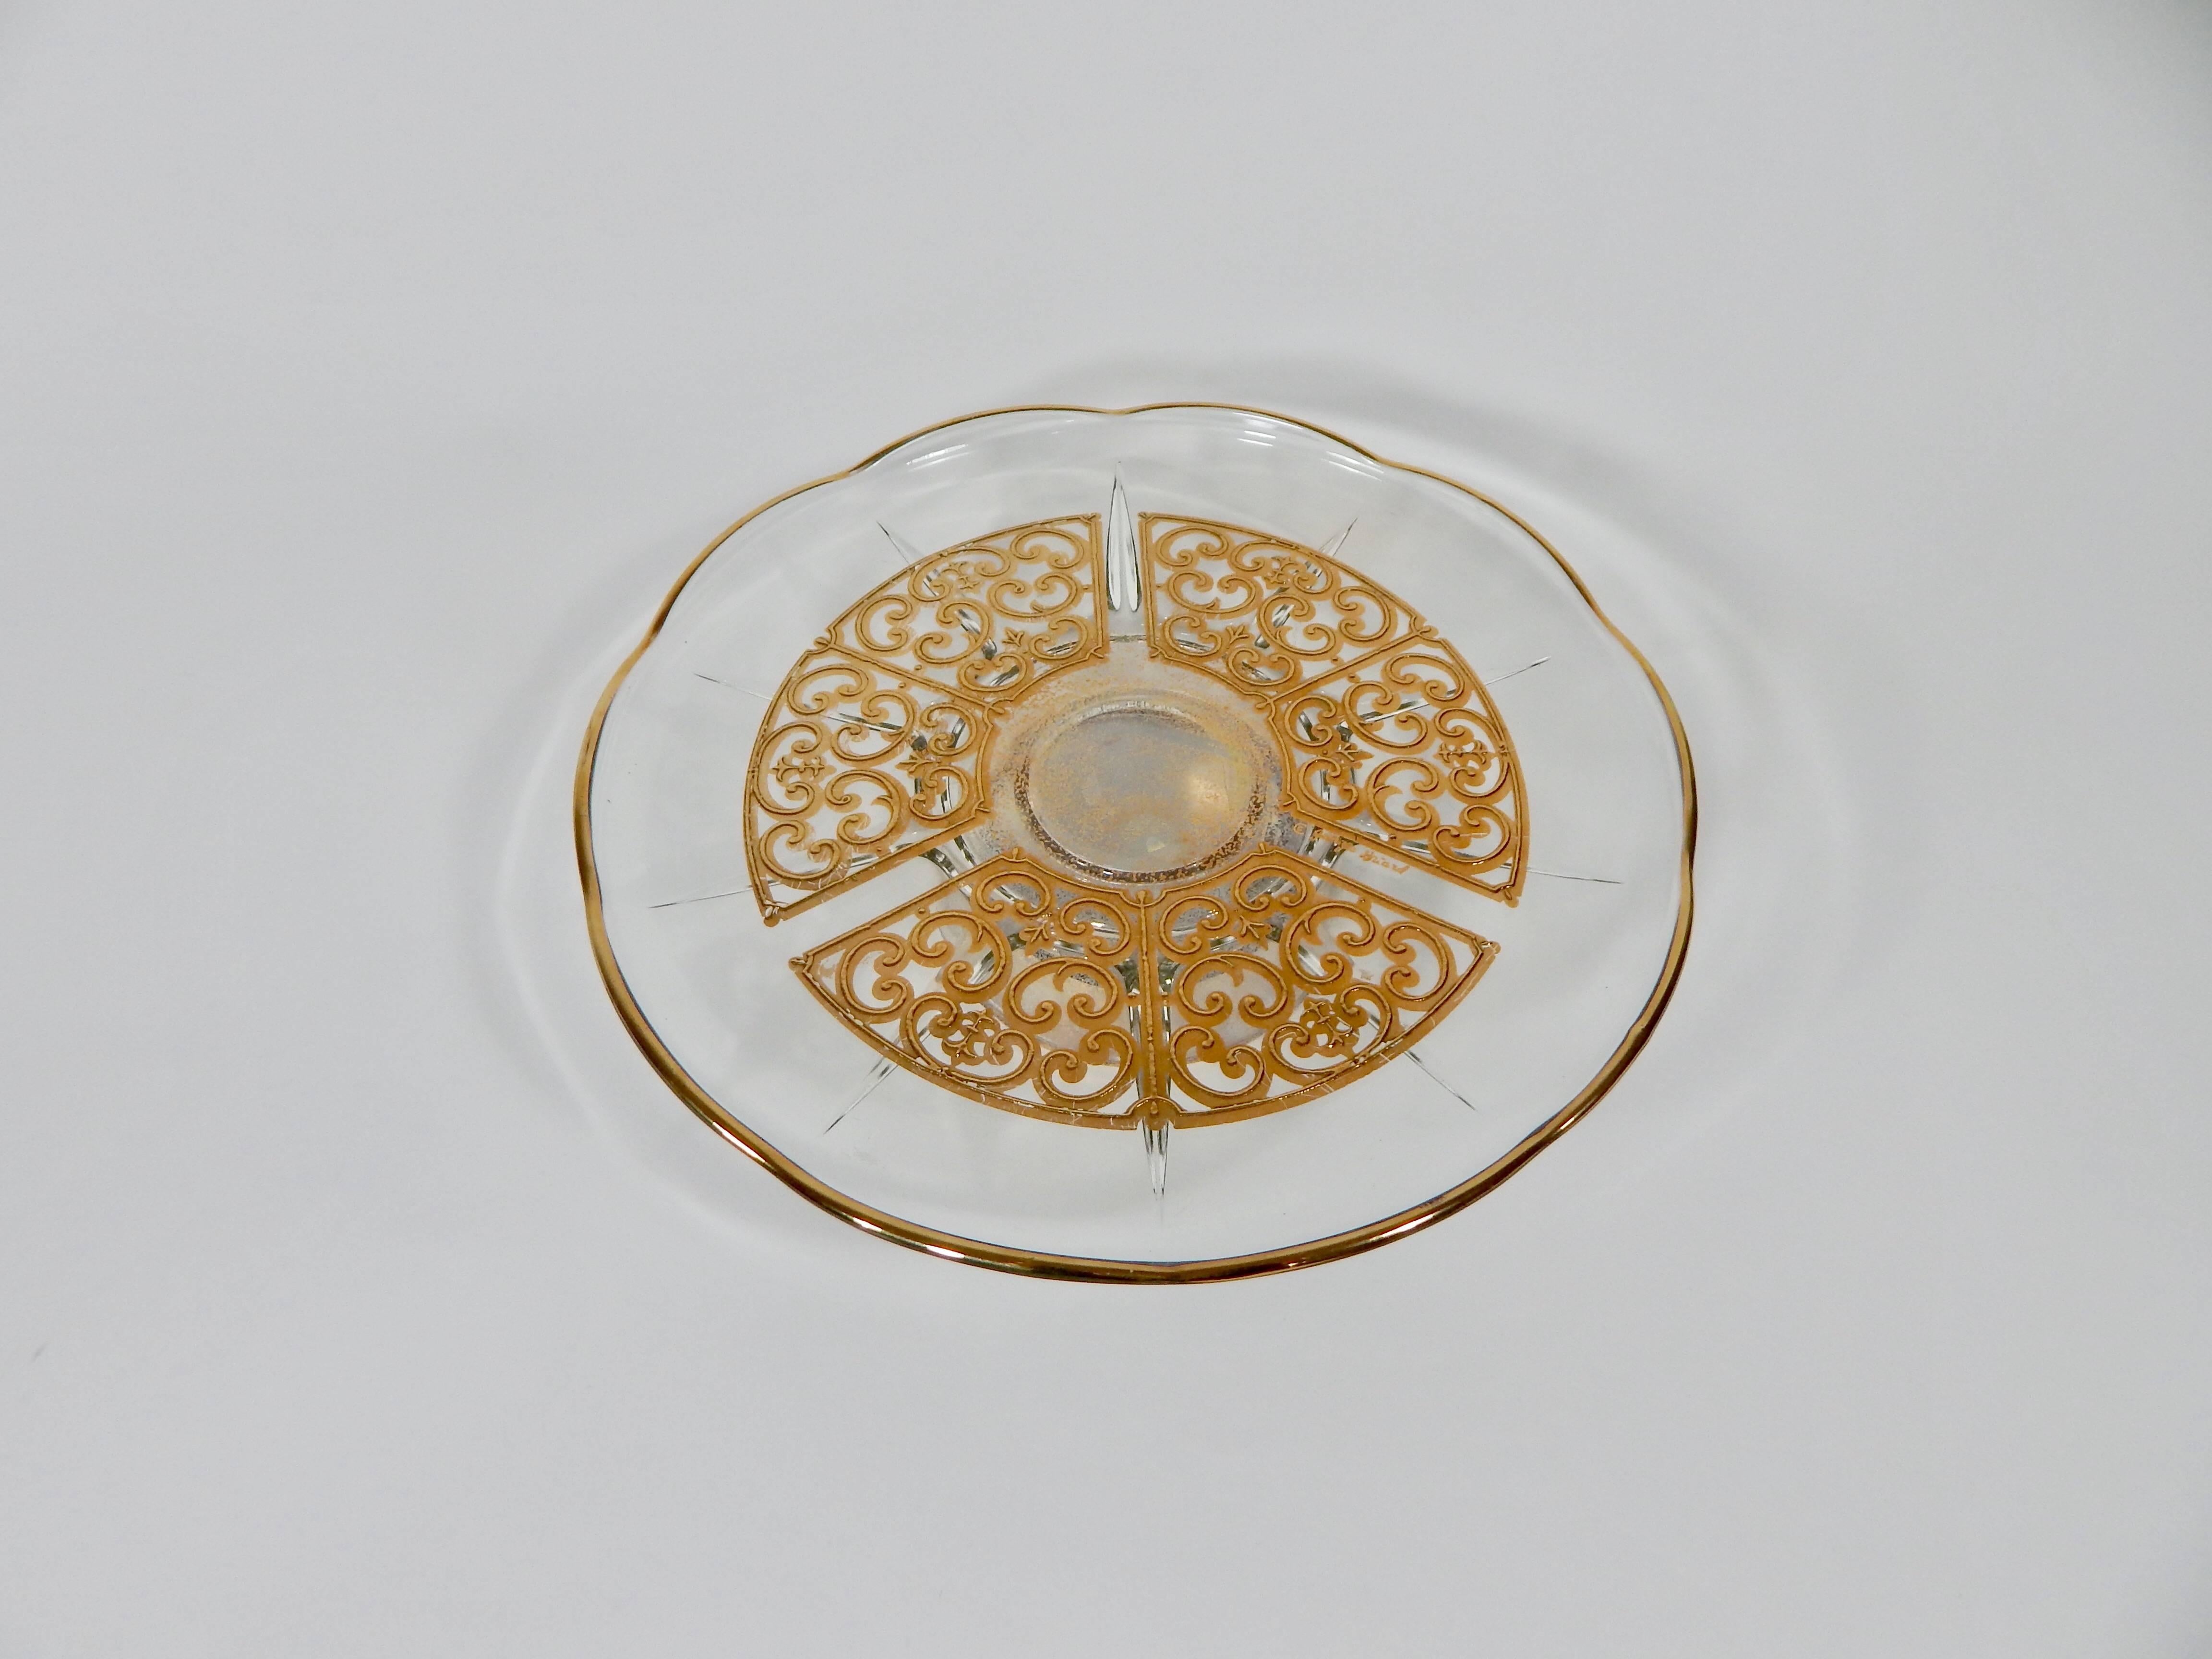 Cake, dessert or pastry plate by Georges Briard, Glass with ornate gold design, Midcentury, 1960s.
    